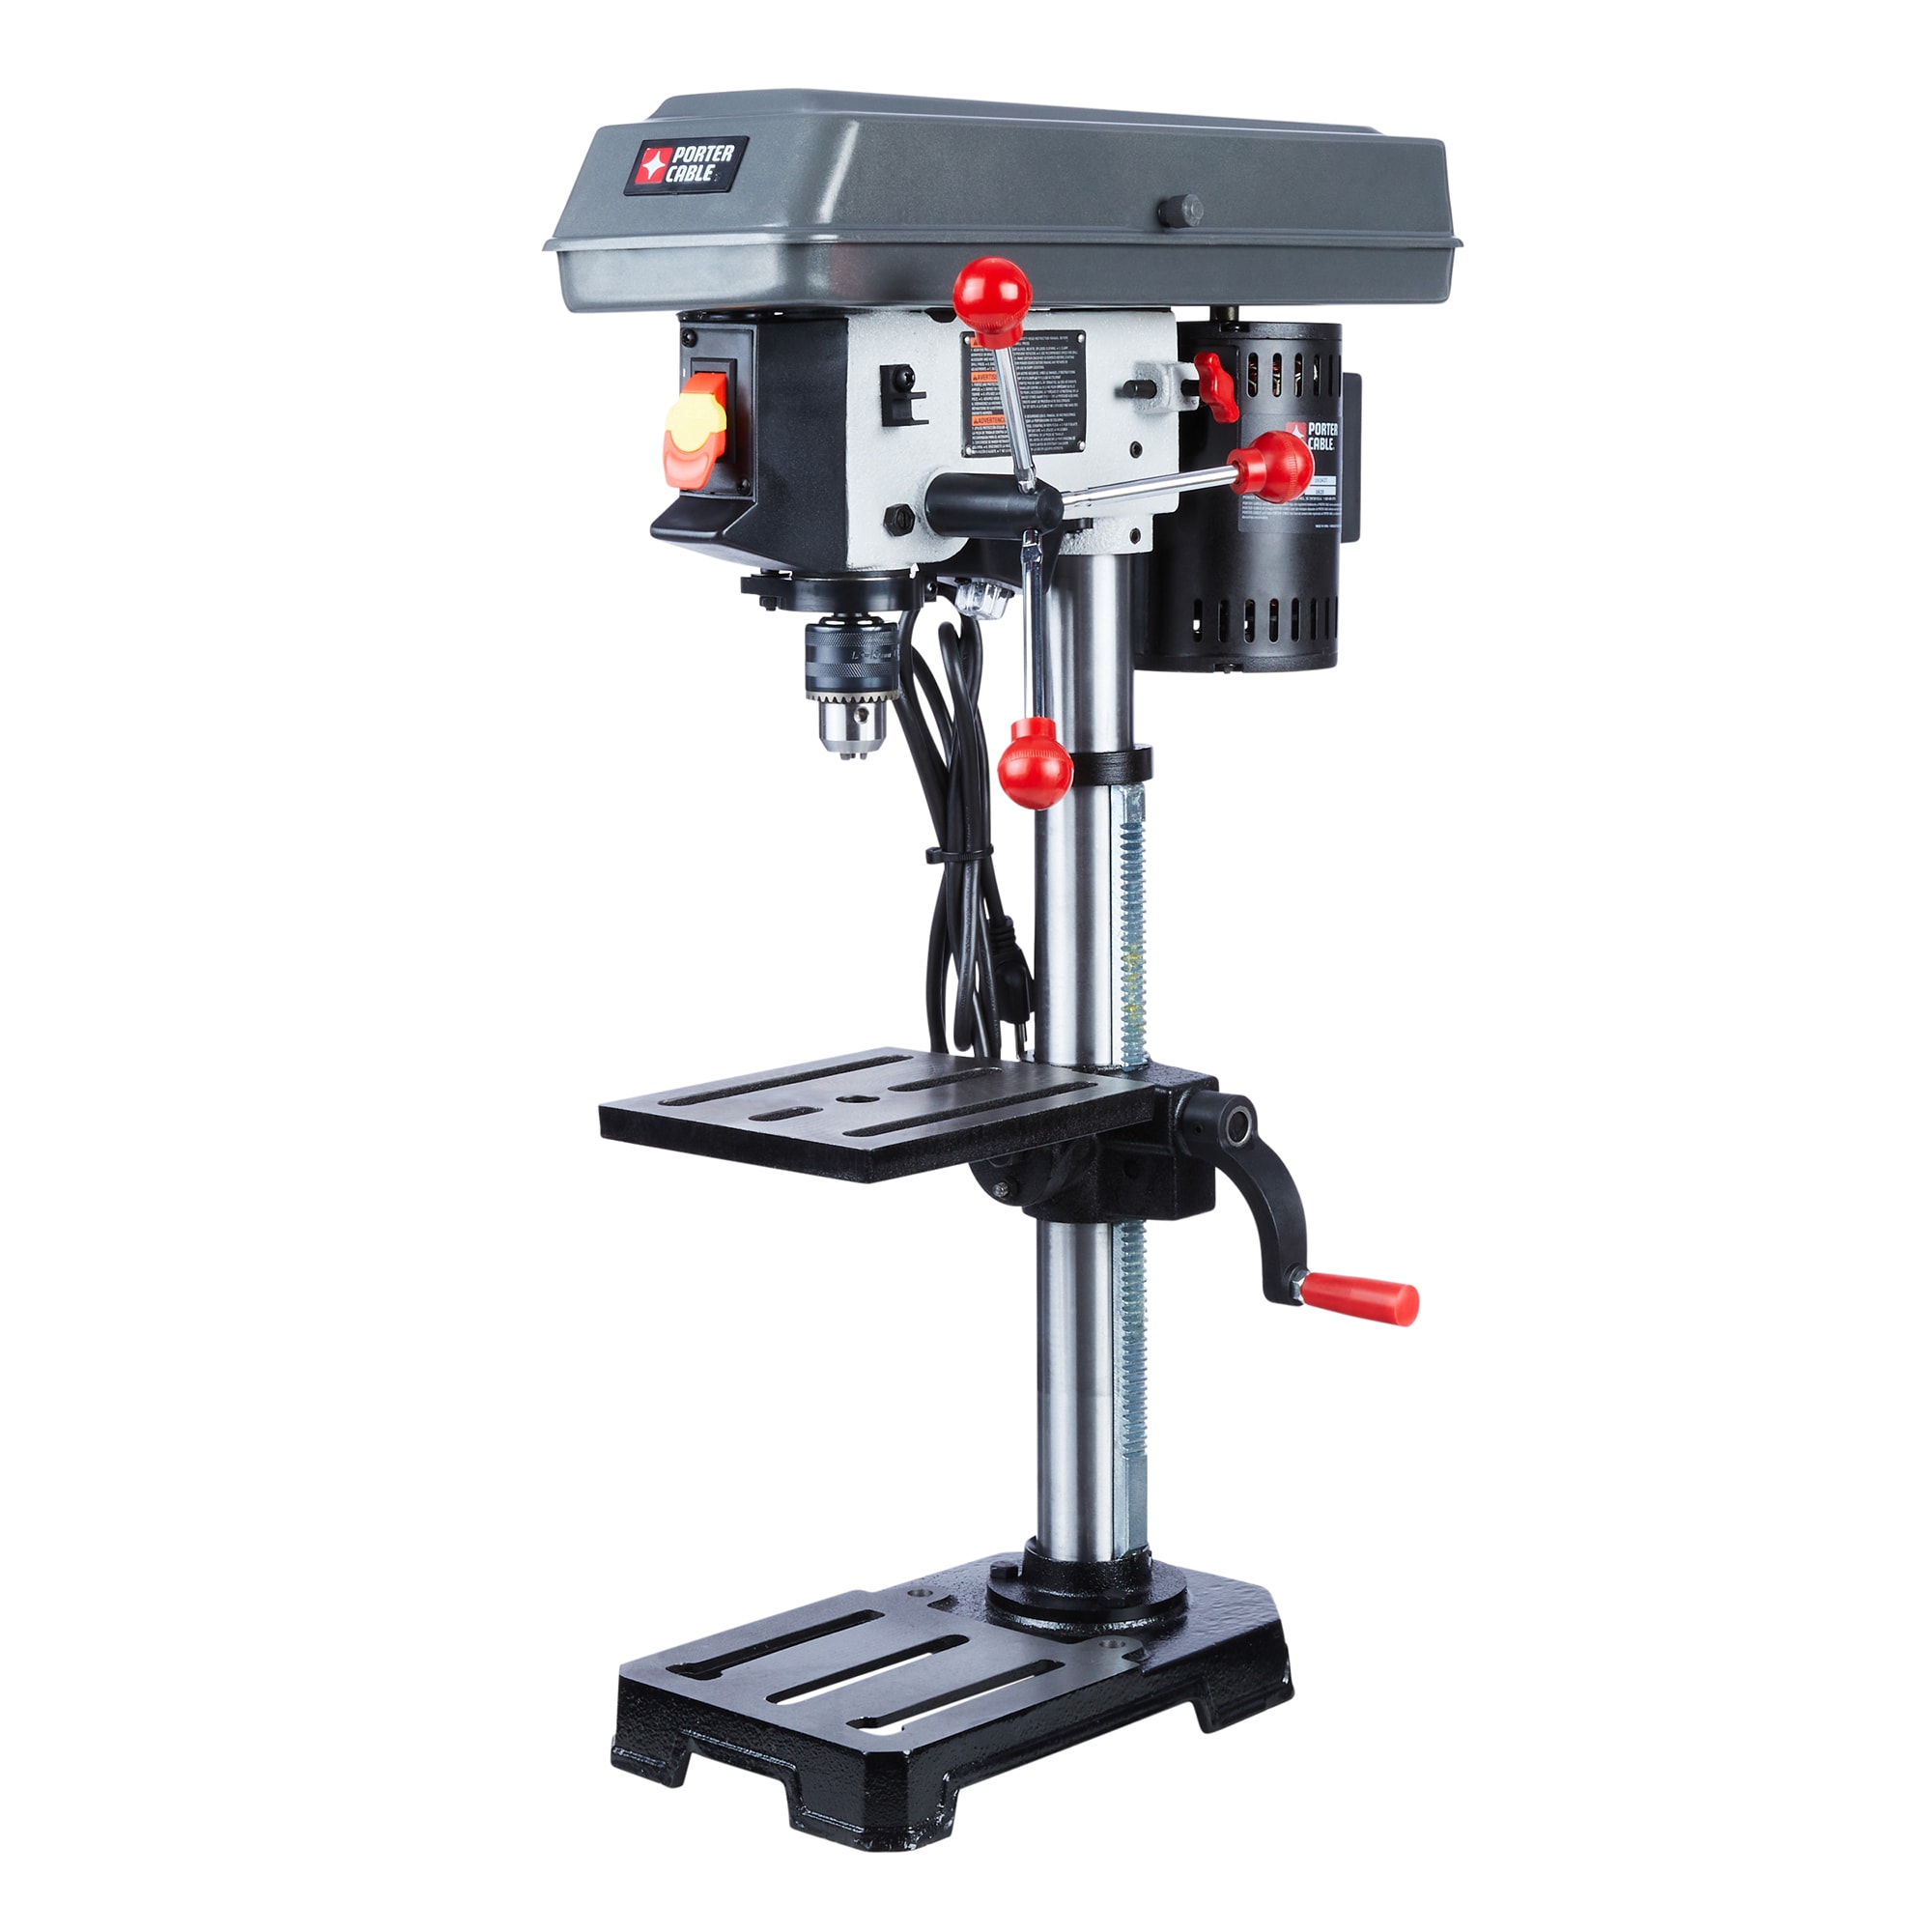 PORTER-CABLE PCXB620DP 3.2-Amp 5-Speed Bench Drill Press - 1